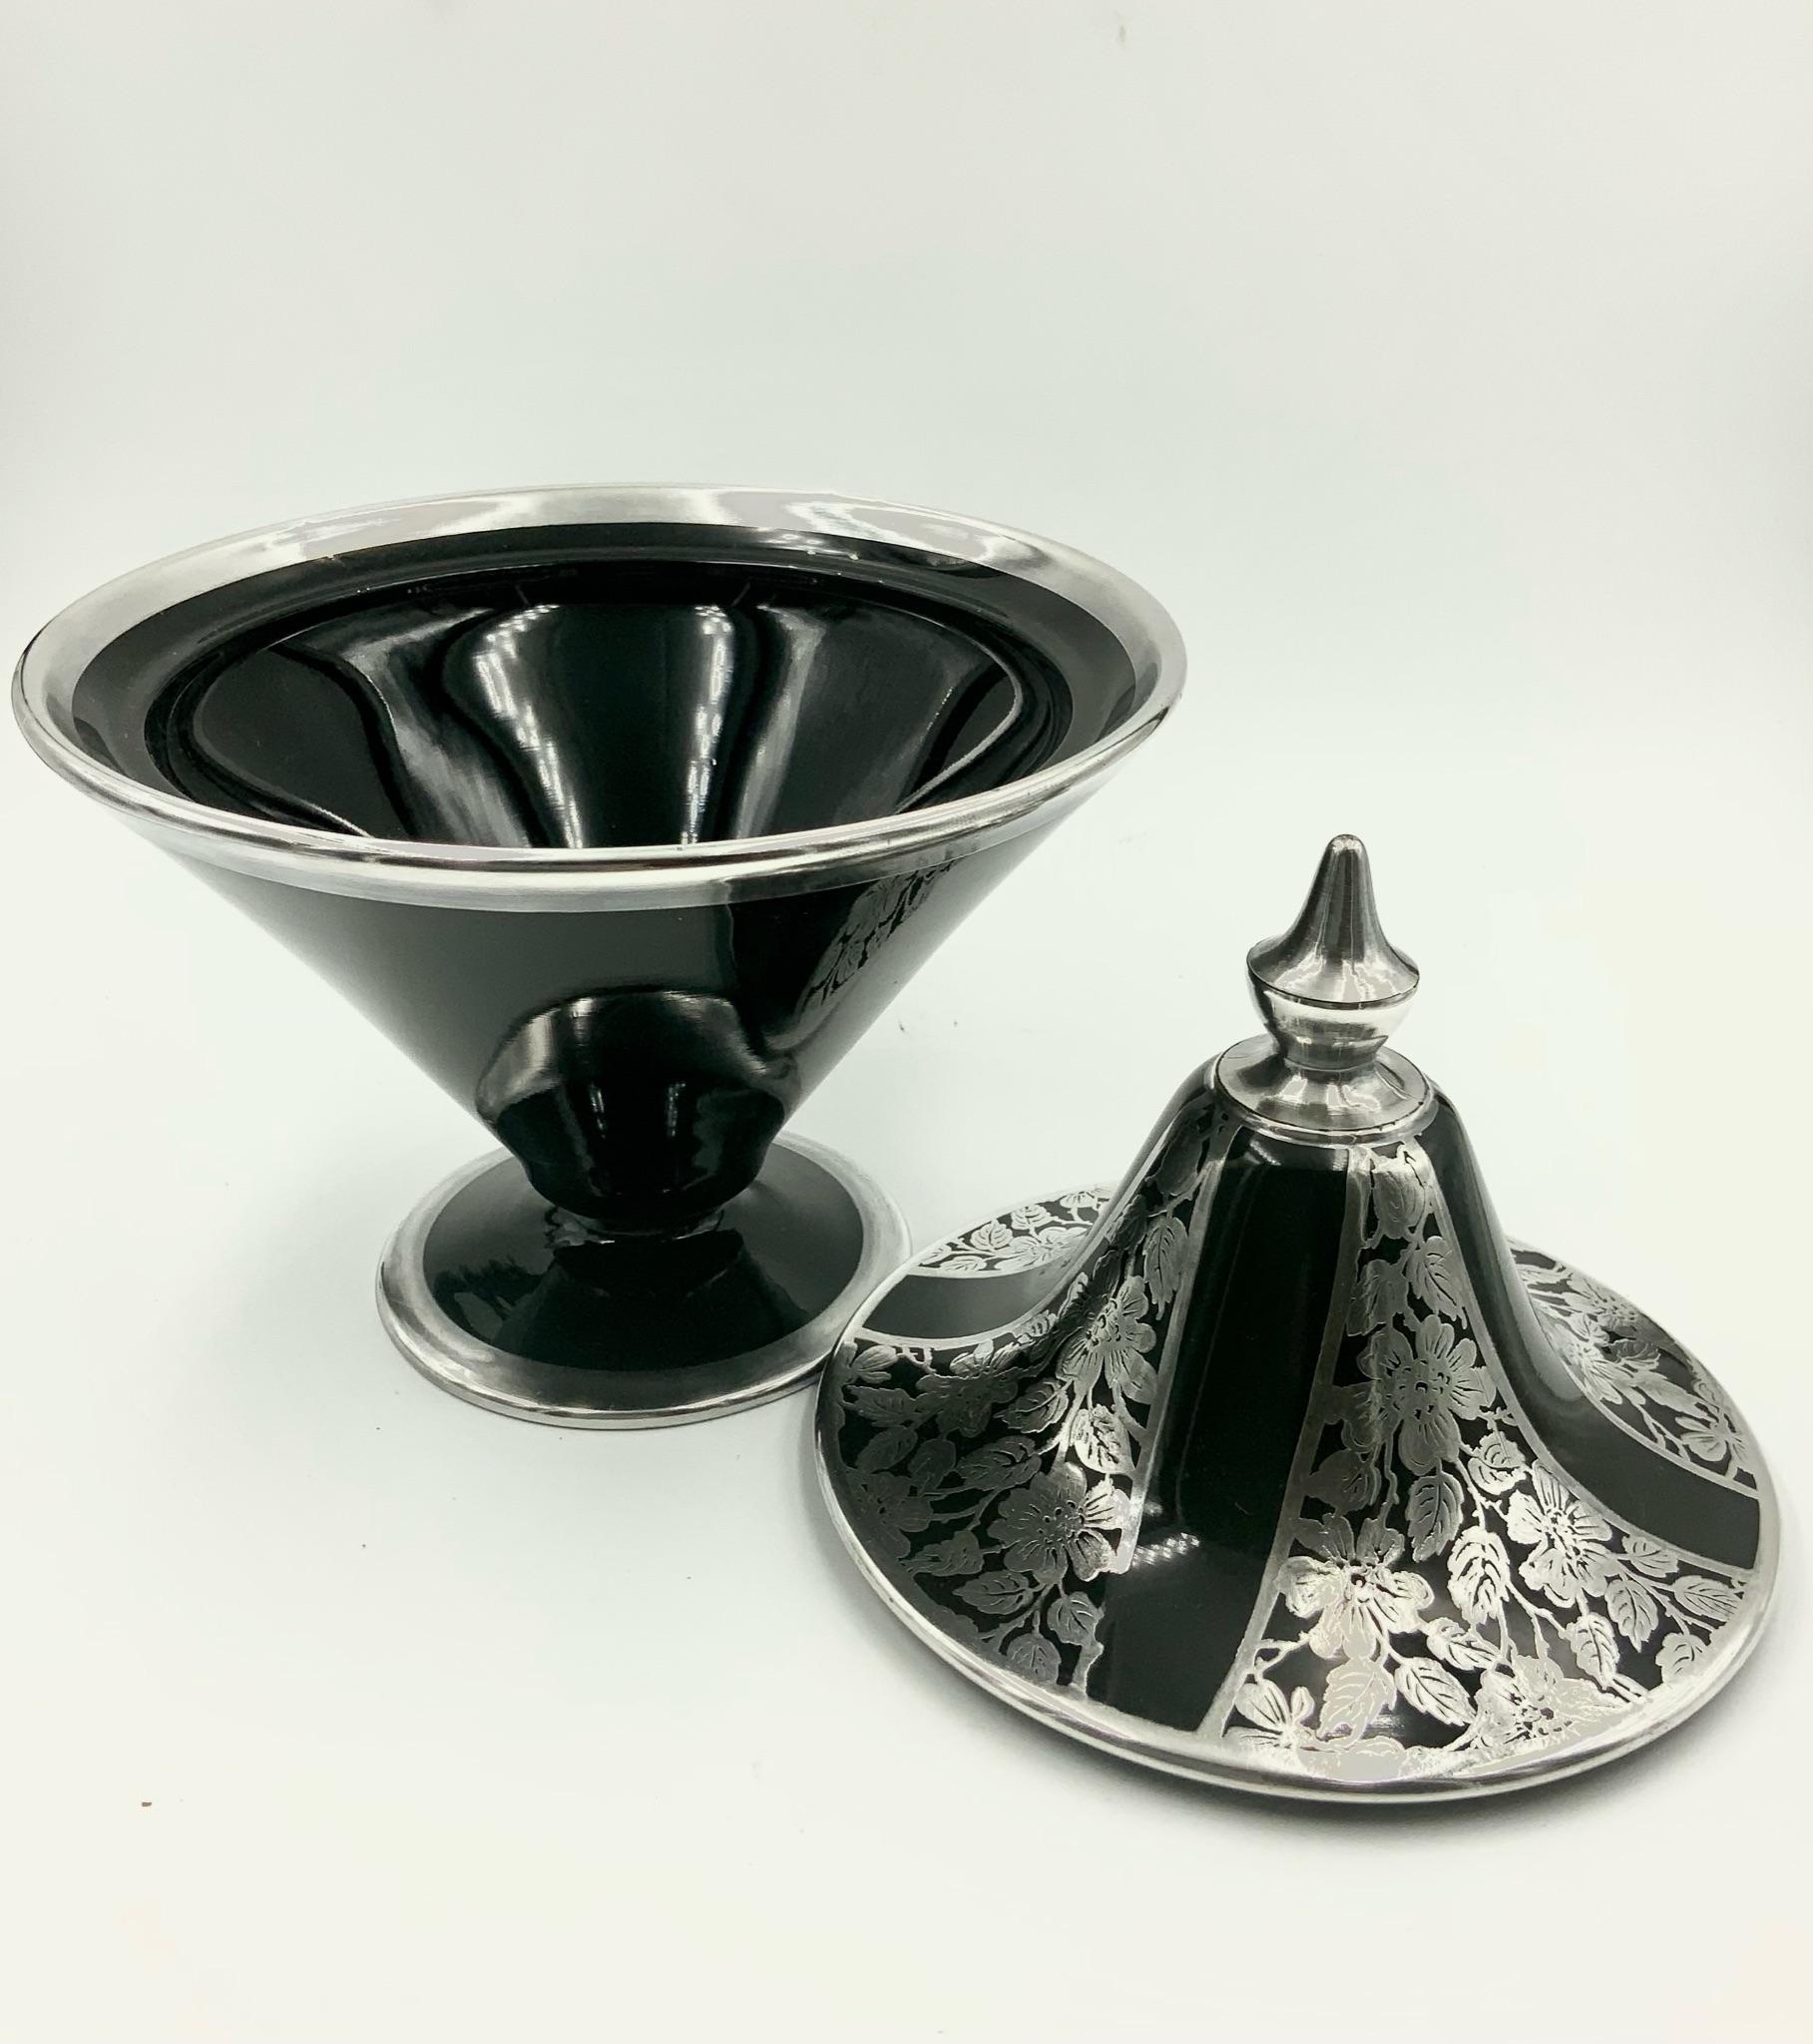 Simply elegant Art Deco covered candy dish / jar / box featuring four panels of flowers and leaves silver overlay design divided by a simple wide black line. The top is deco style pointy handle. There are silver rims at the base, on the top of the